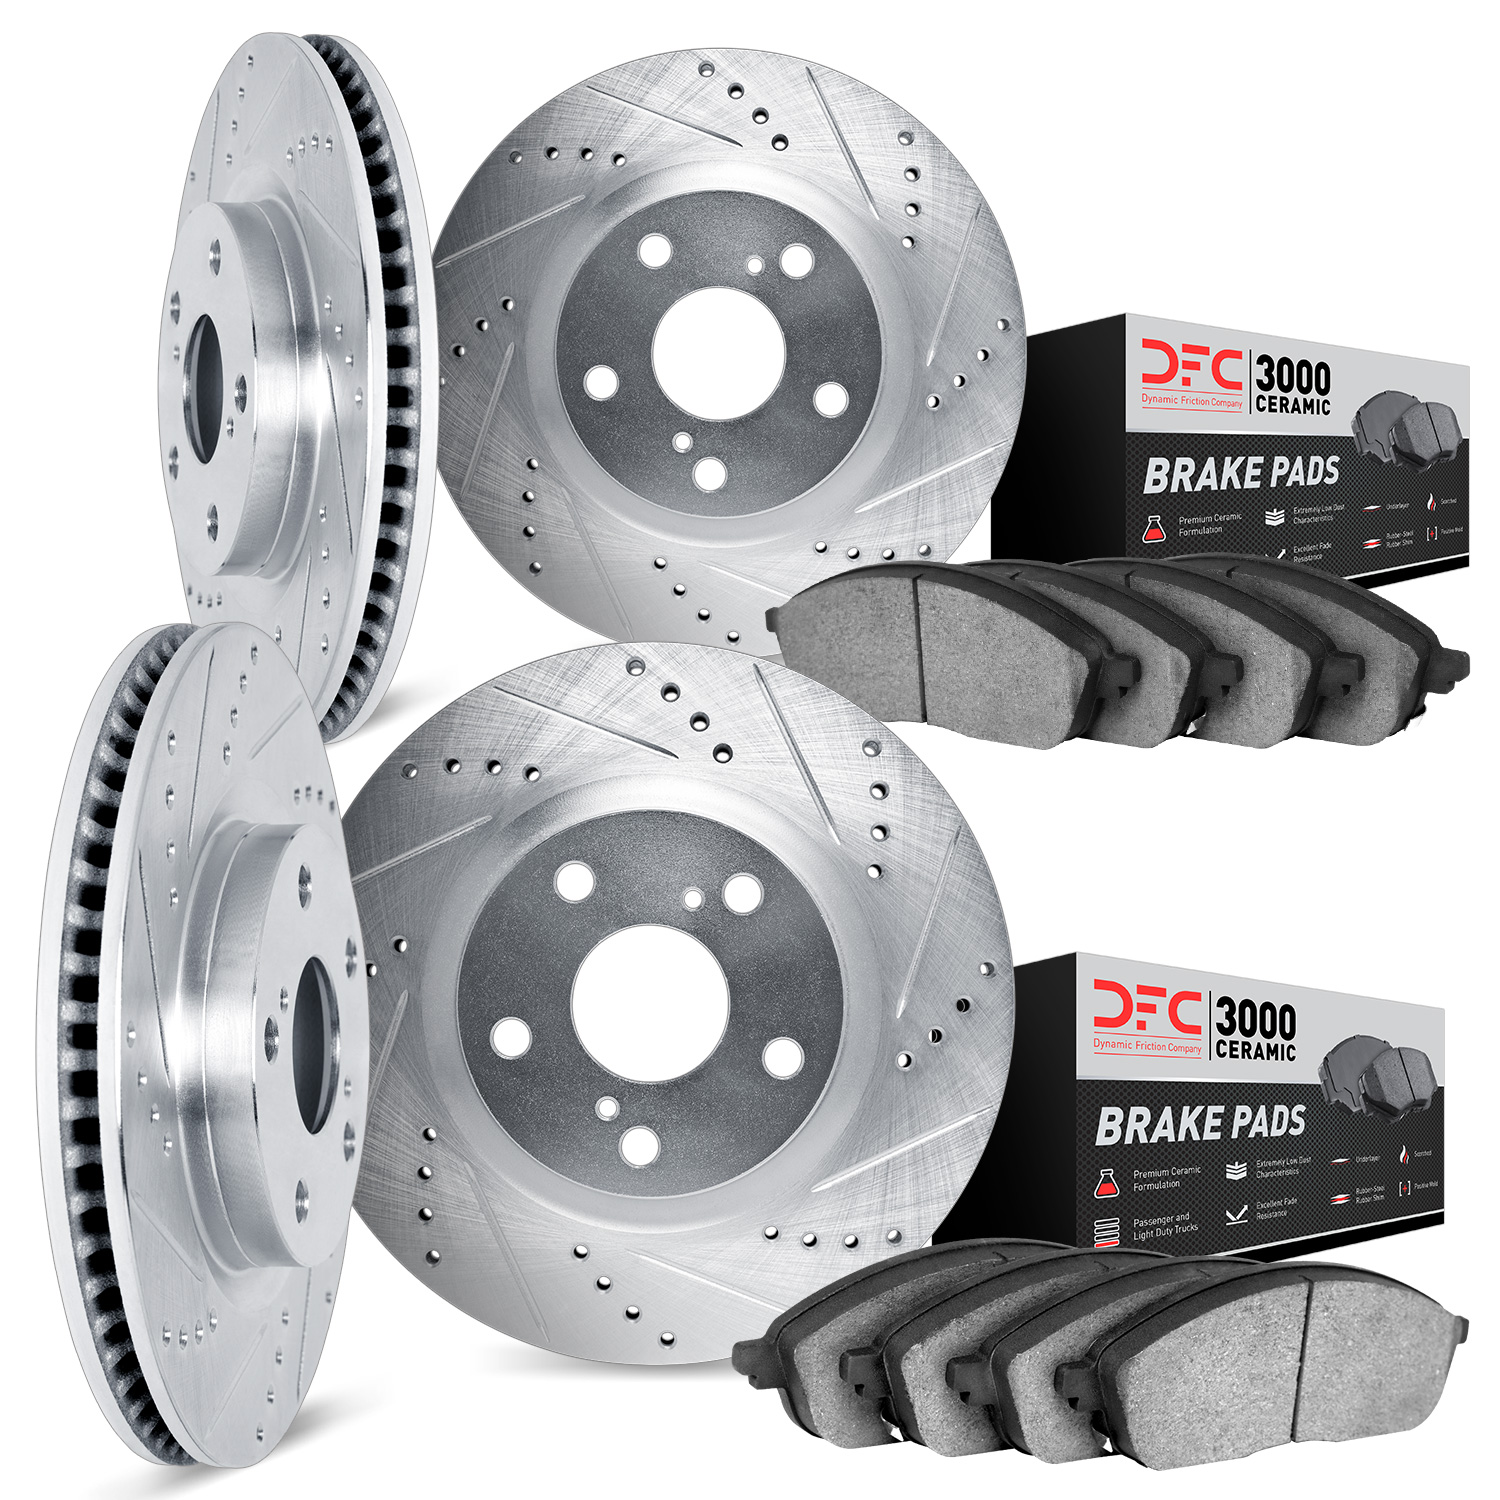 7304-73055 Drilled/Slotted Brake Rotor with 3000-Series Ceramic Brake Pads Kit [Silver], 2004-2009 Audi/Volkswagen, Position: Fr